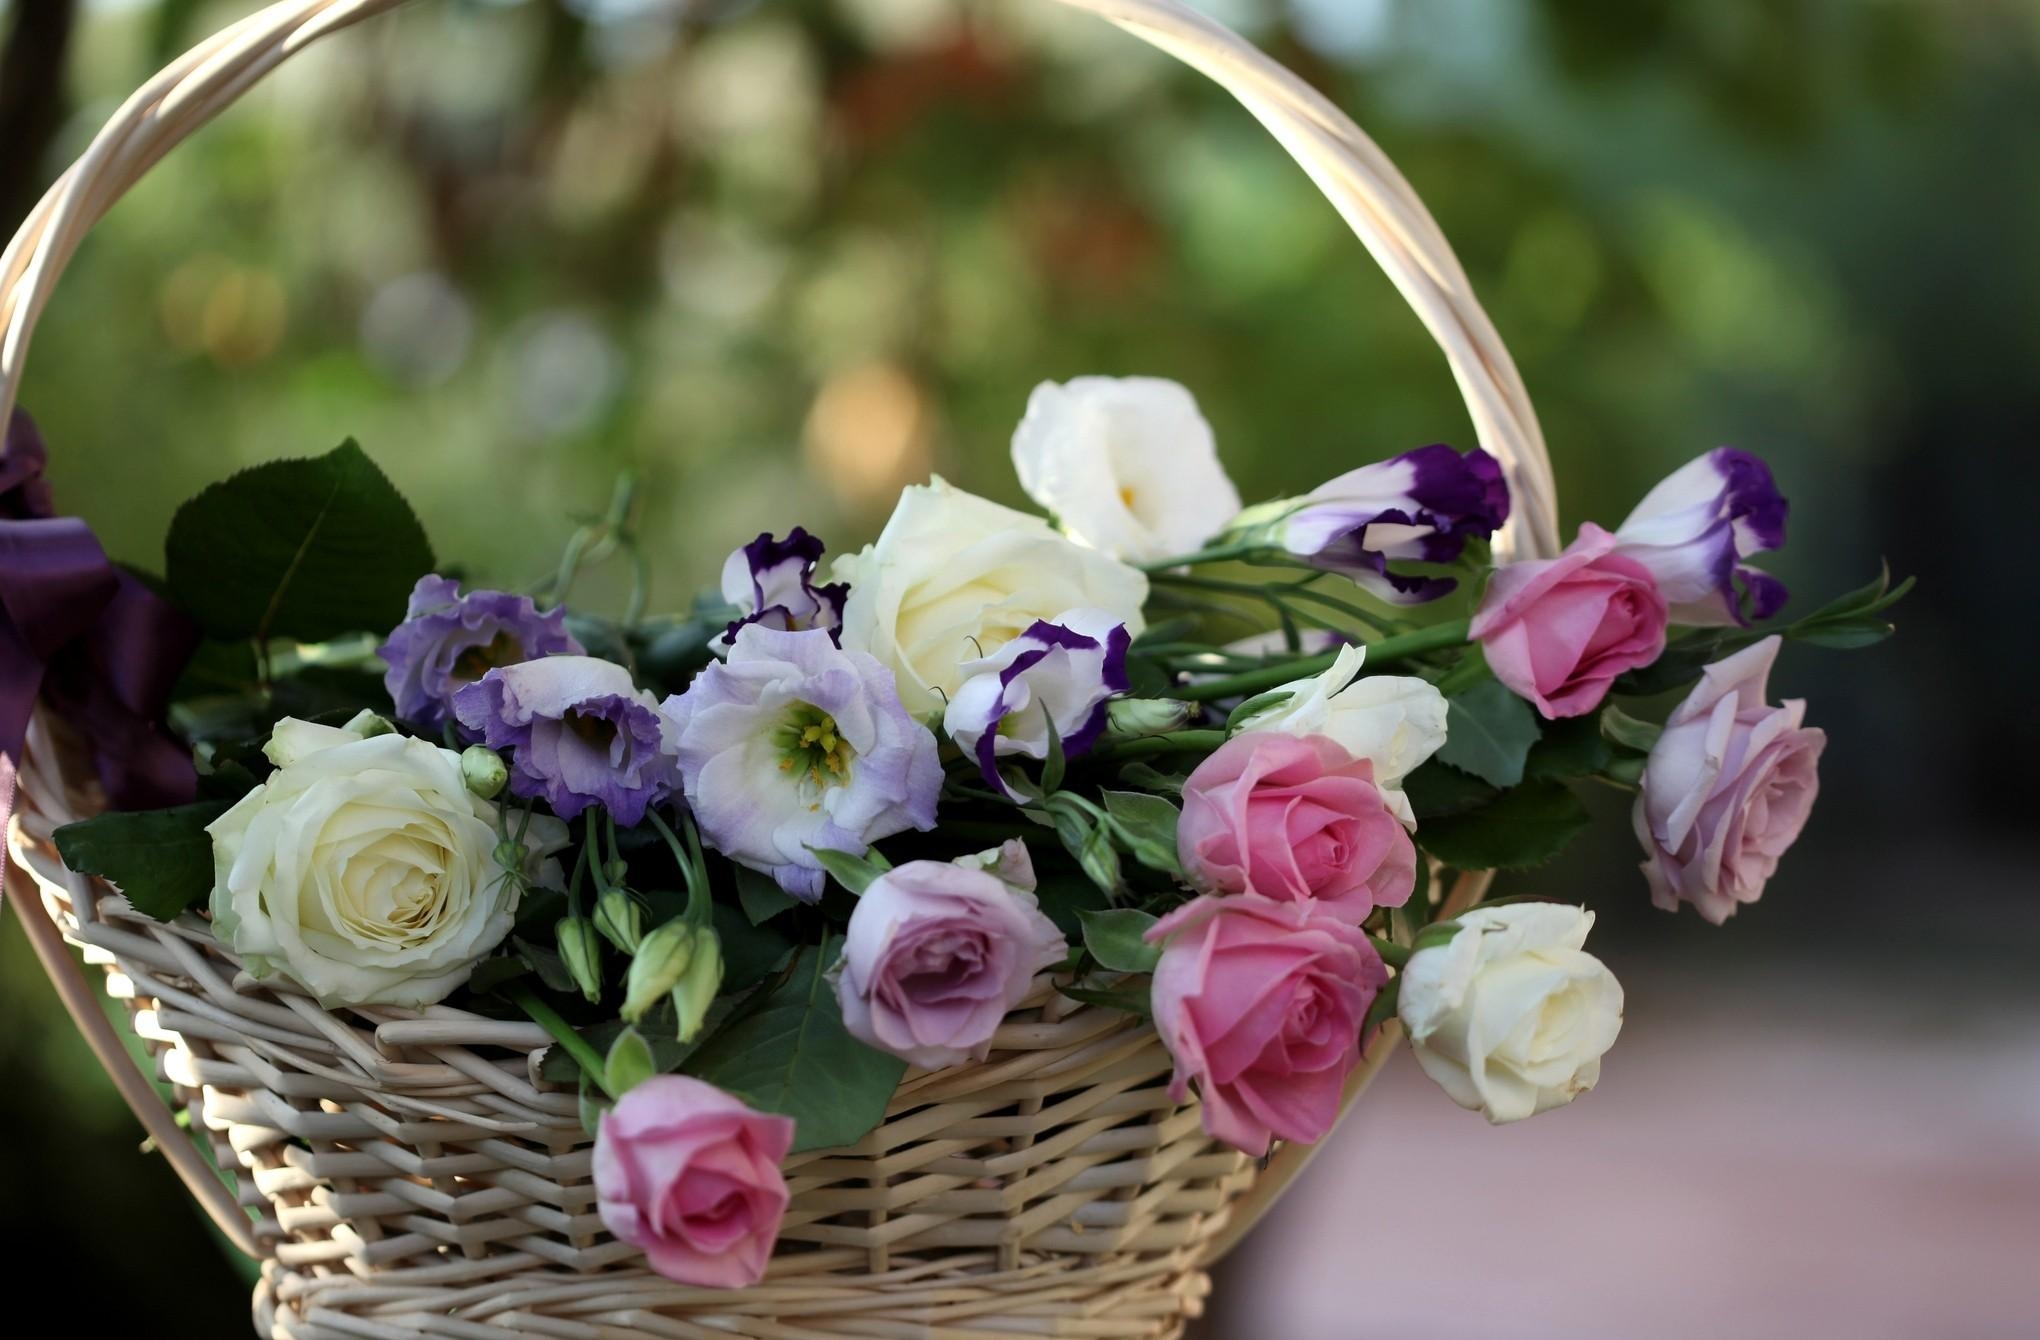 roses, flowers, blur, smooth, basket, lisianthus russell, lisiantus russell 4K, Ultra HD